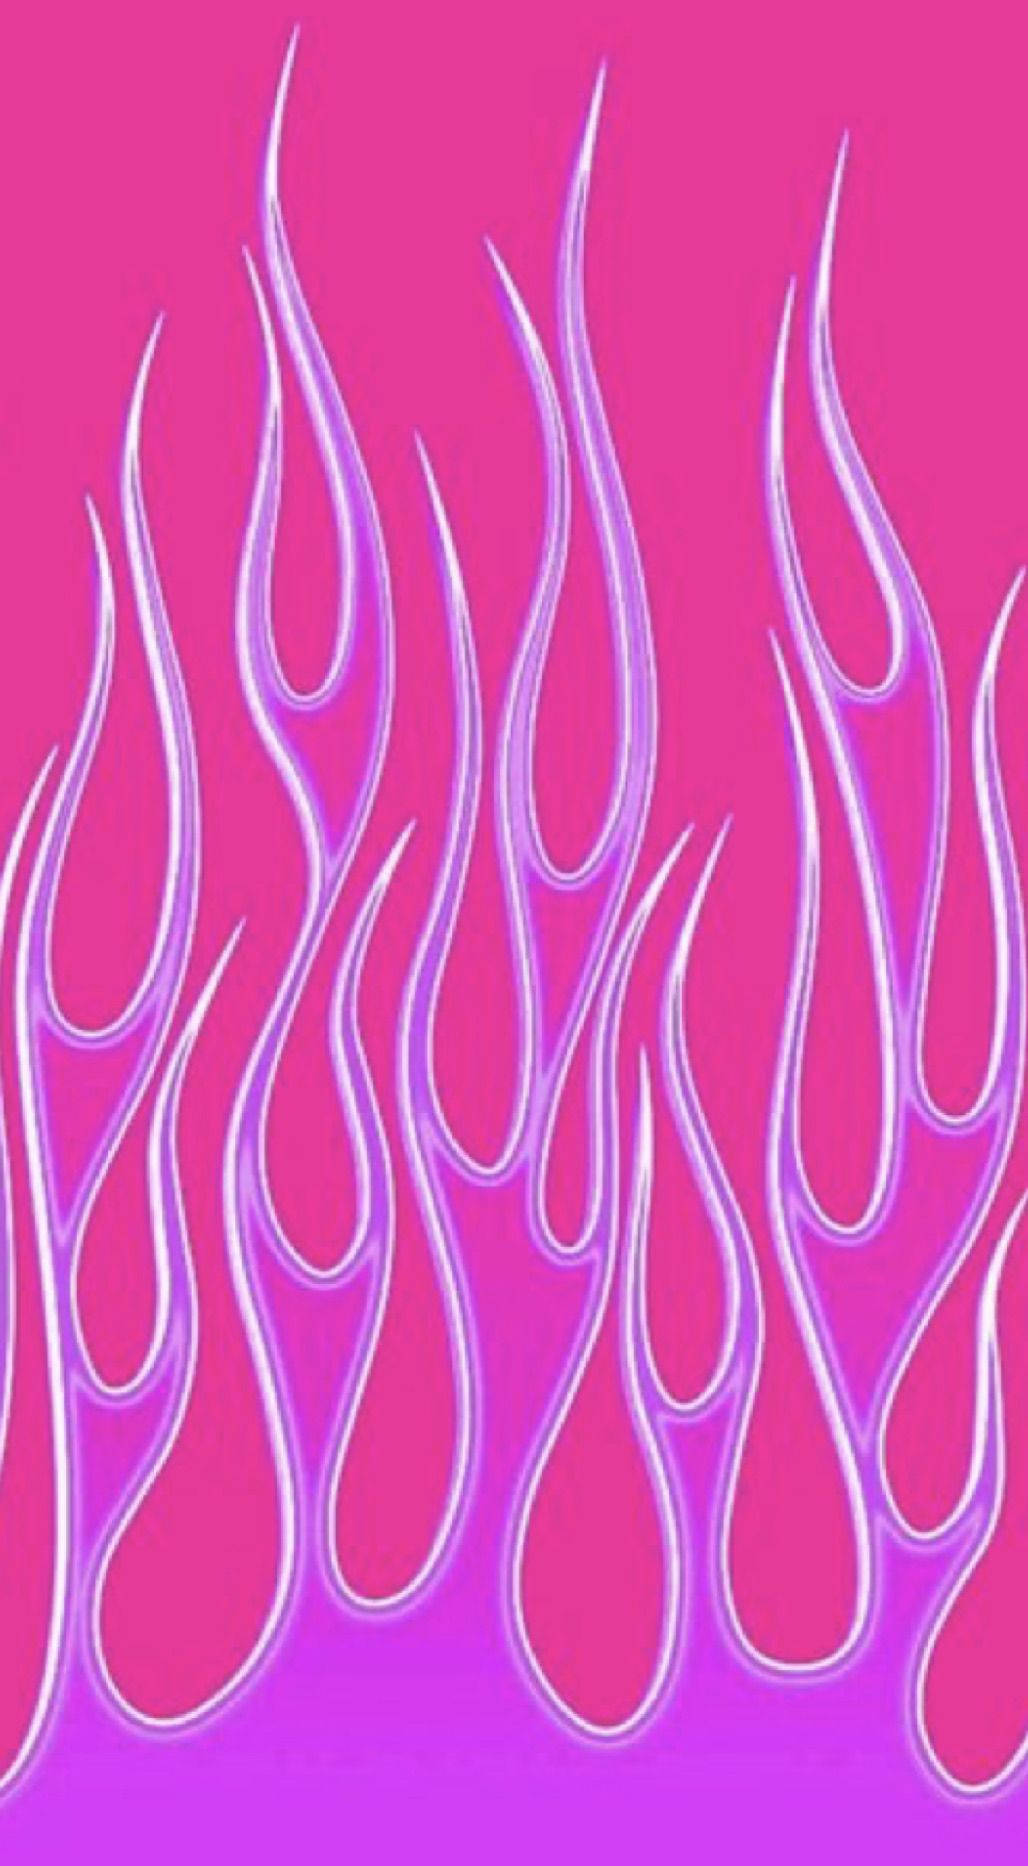 A Pink And Purple Flames On A Pink Background Wallpaper